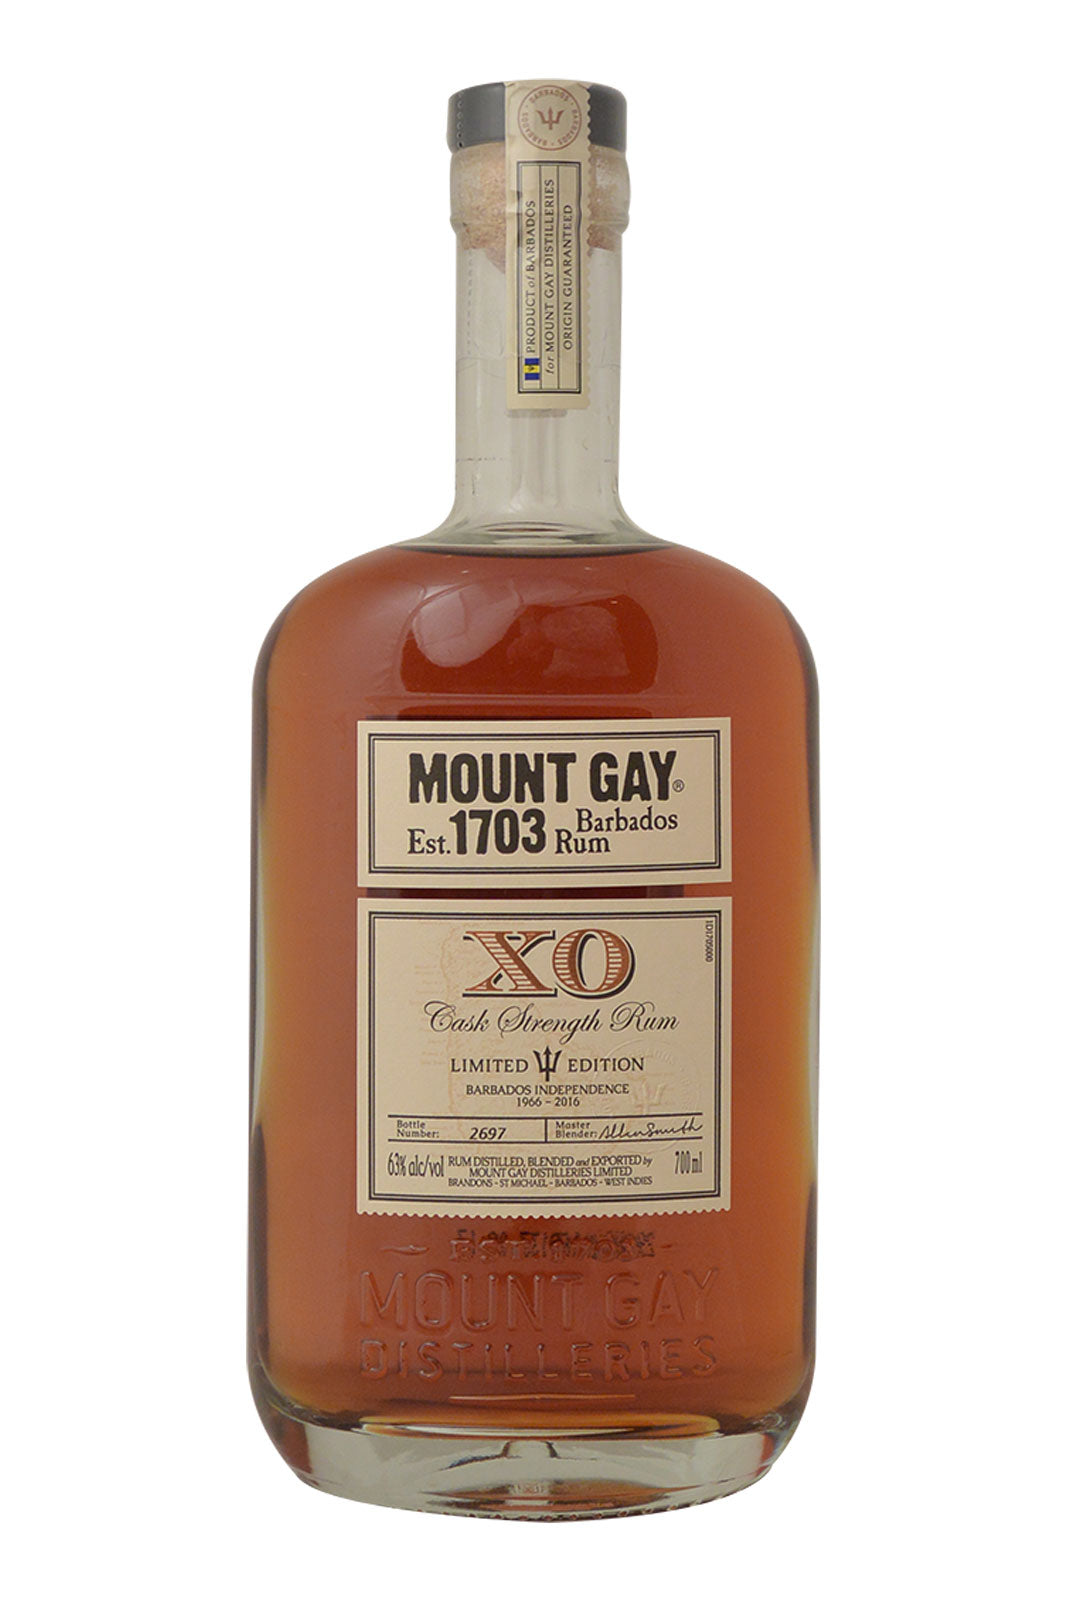 Mount Gay XO Triple Cask Strength Limited Edition